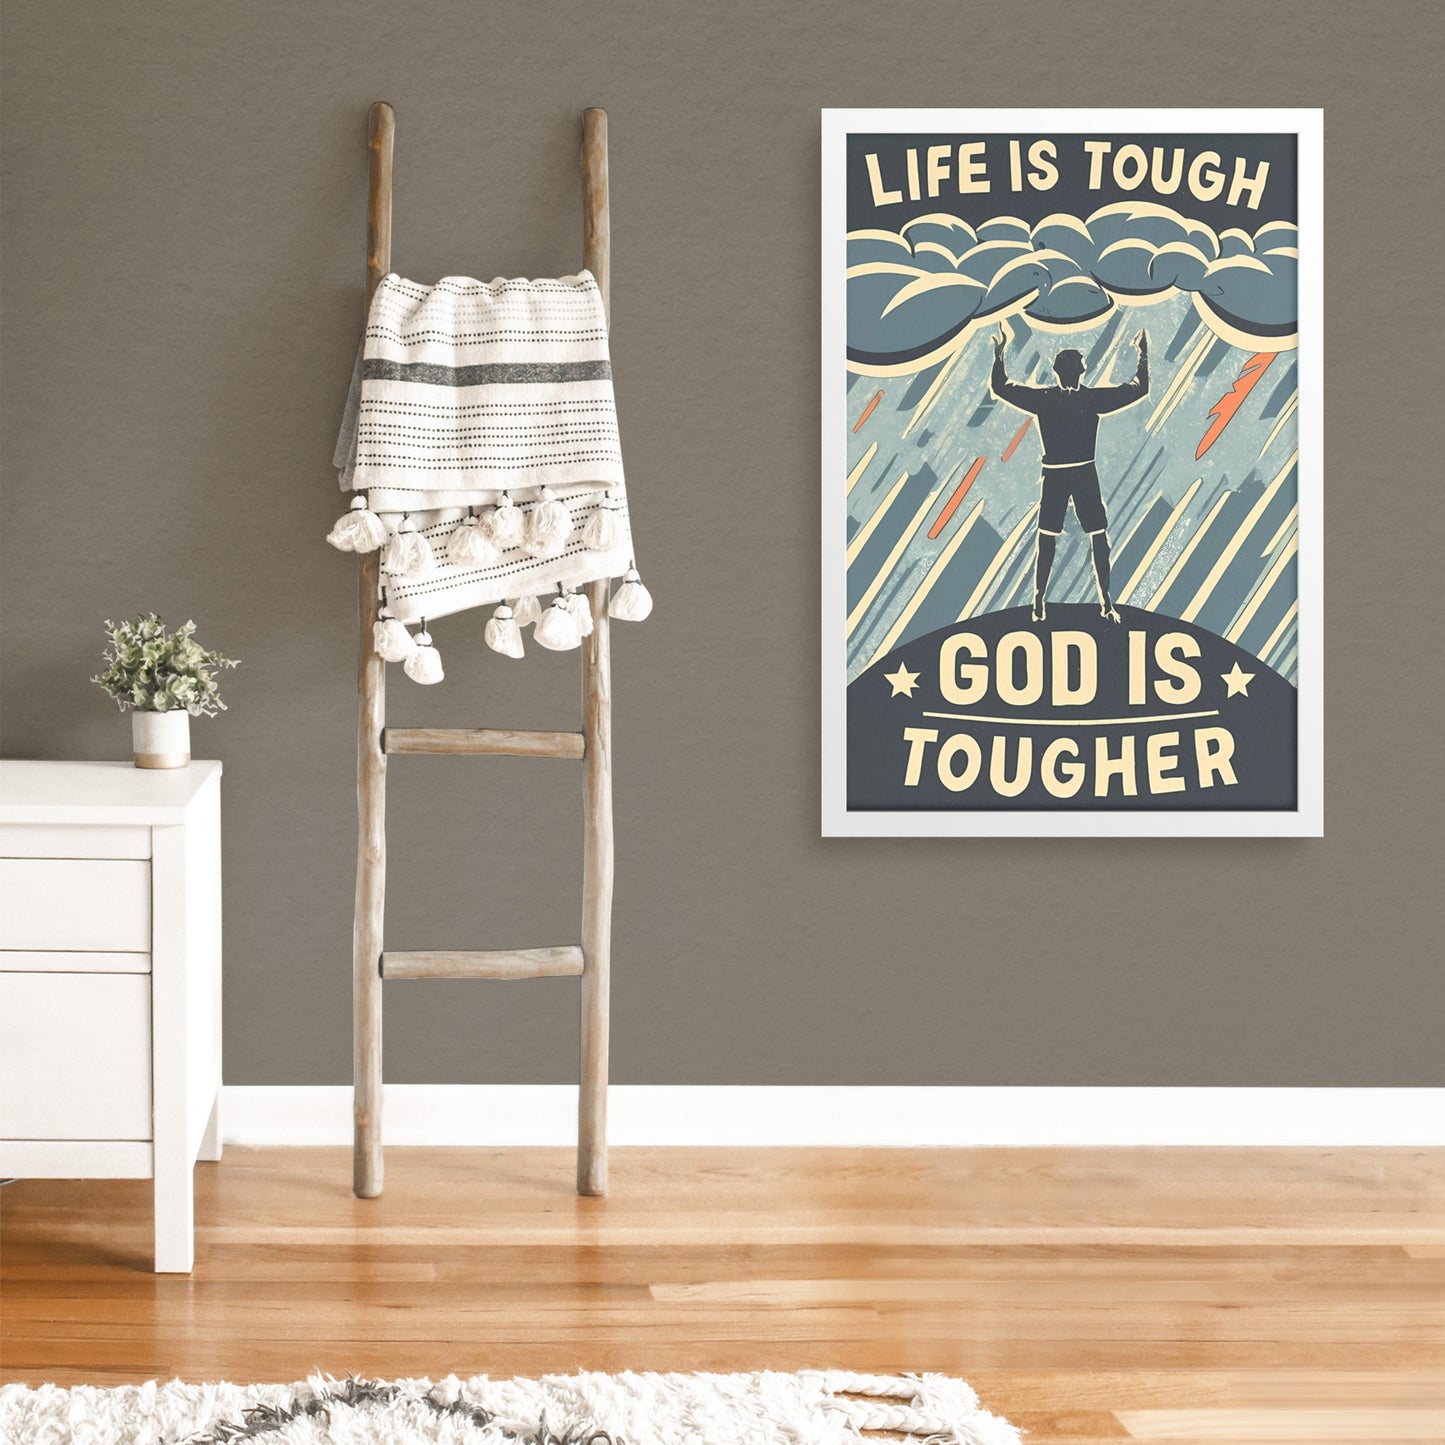 Life is Tough, But God is Tougher Retro Style Framed Poster